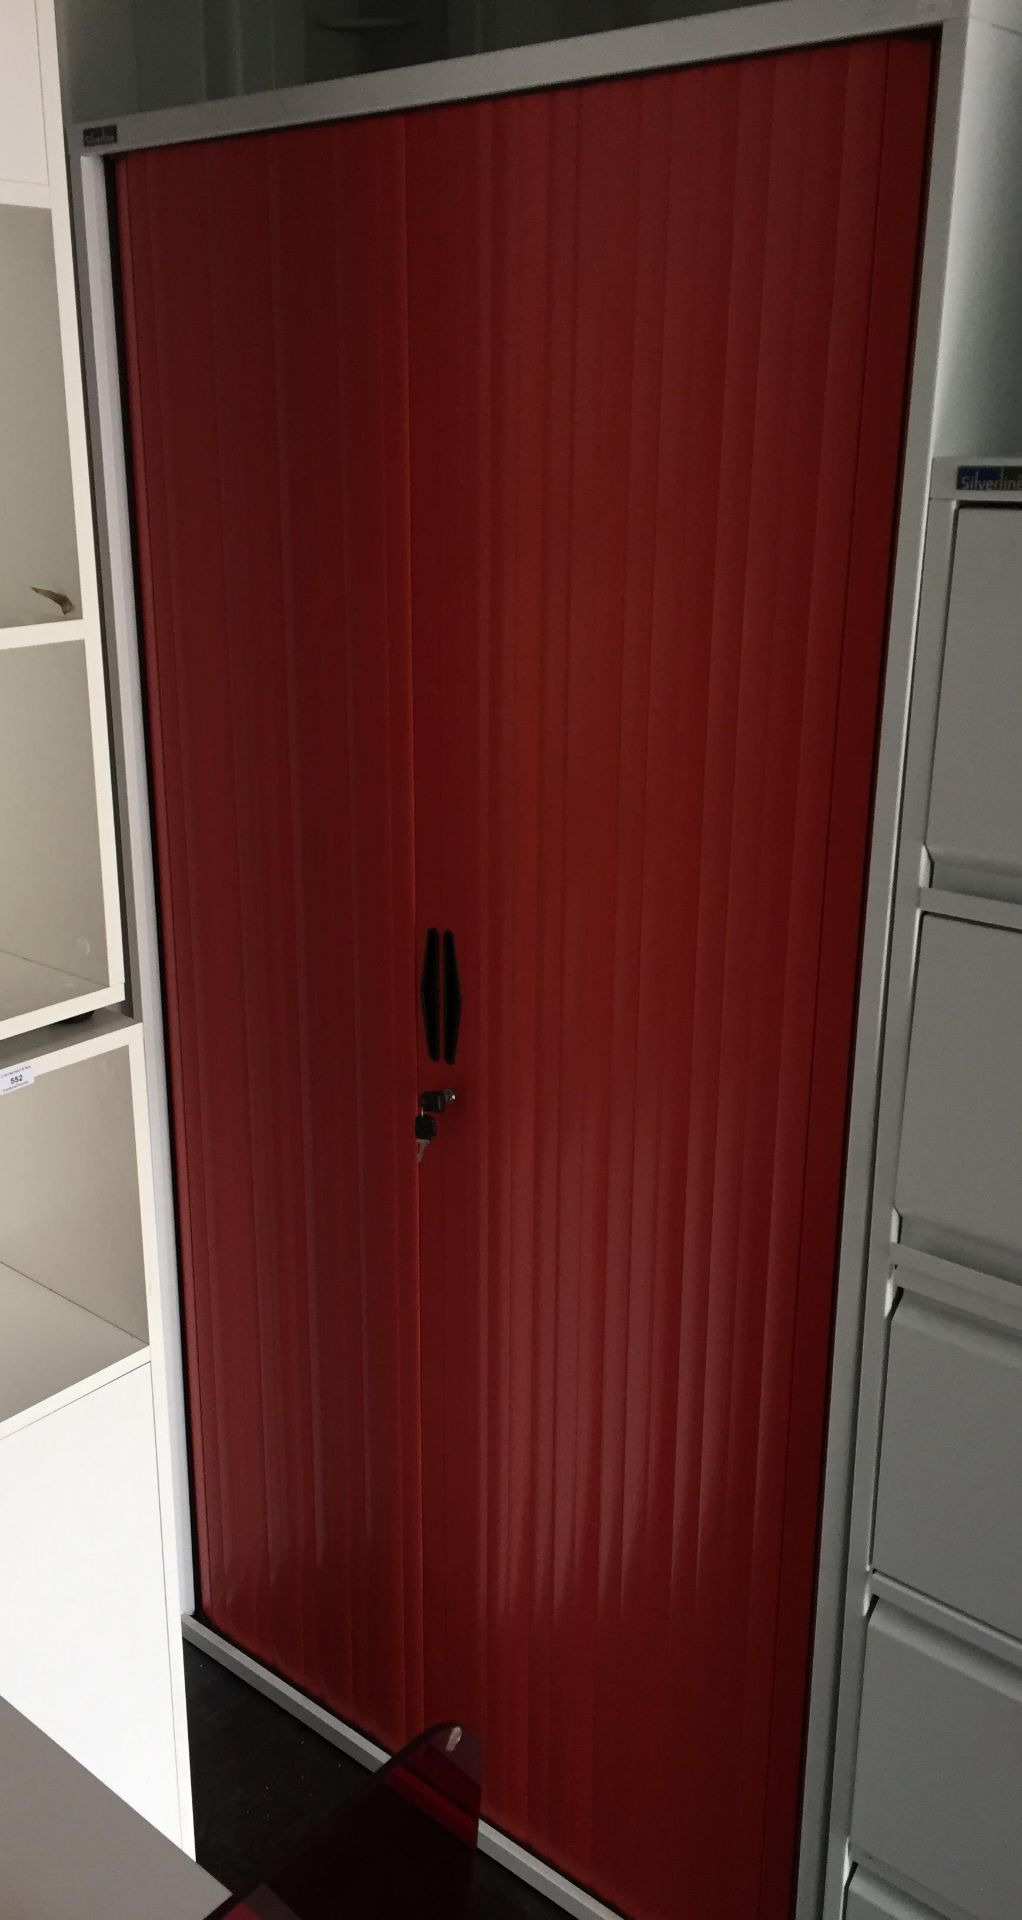 Silverline red tambour double door stationery cabinet 193 x 100 x 48cm complete with key *Please